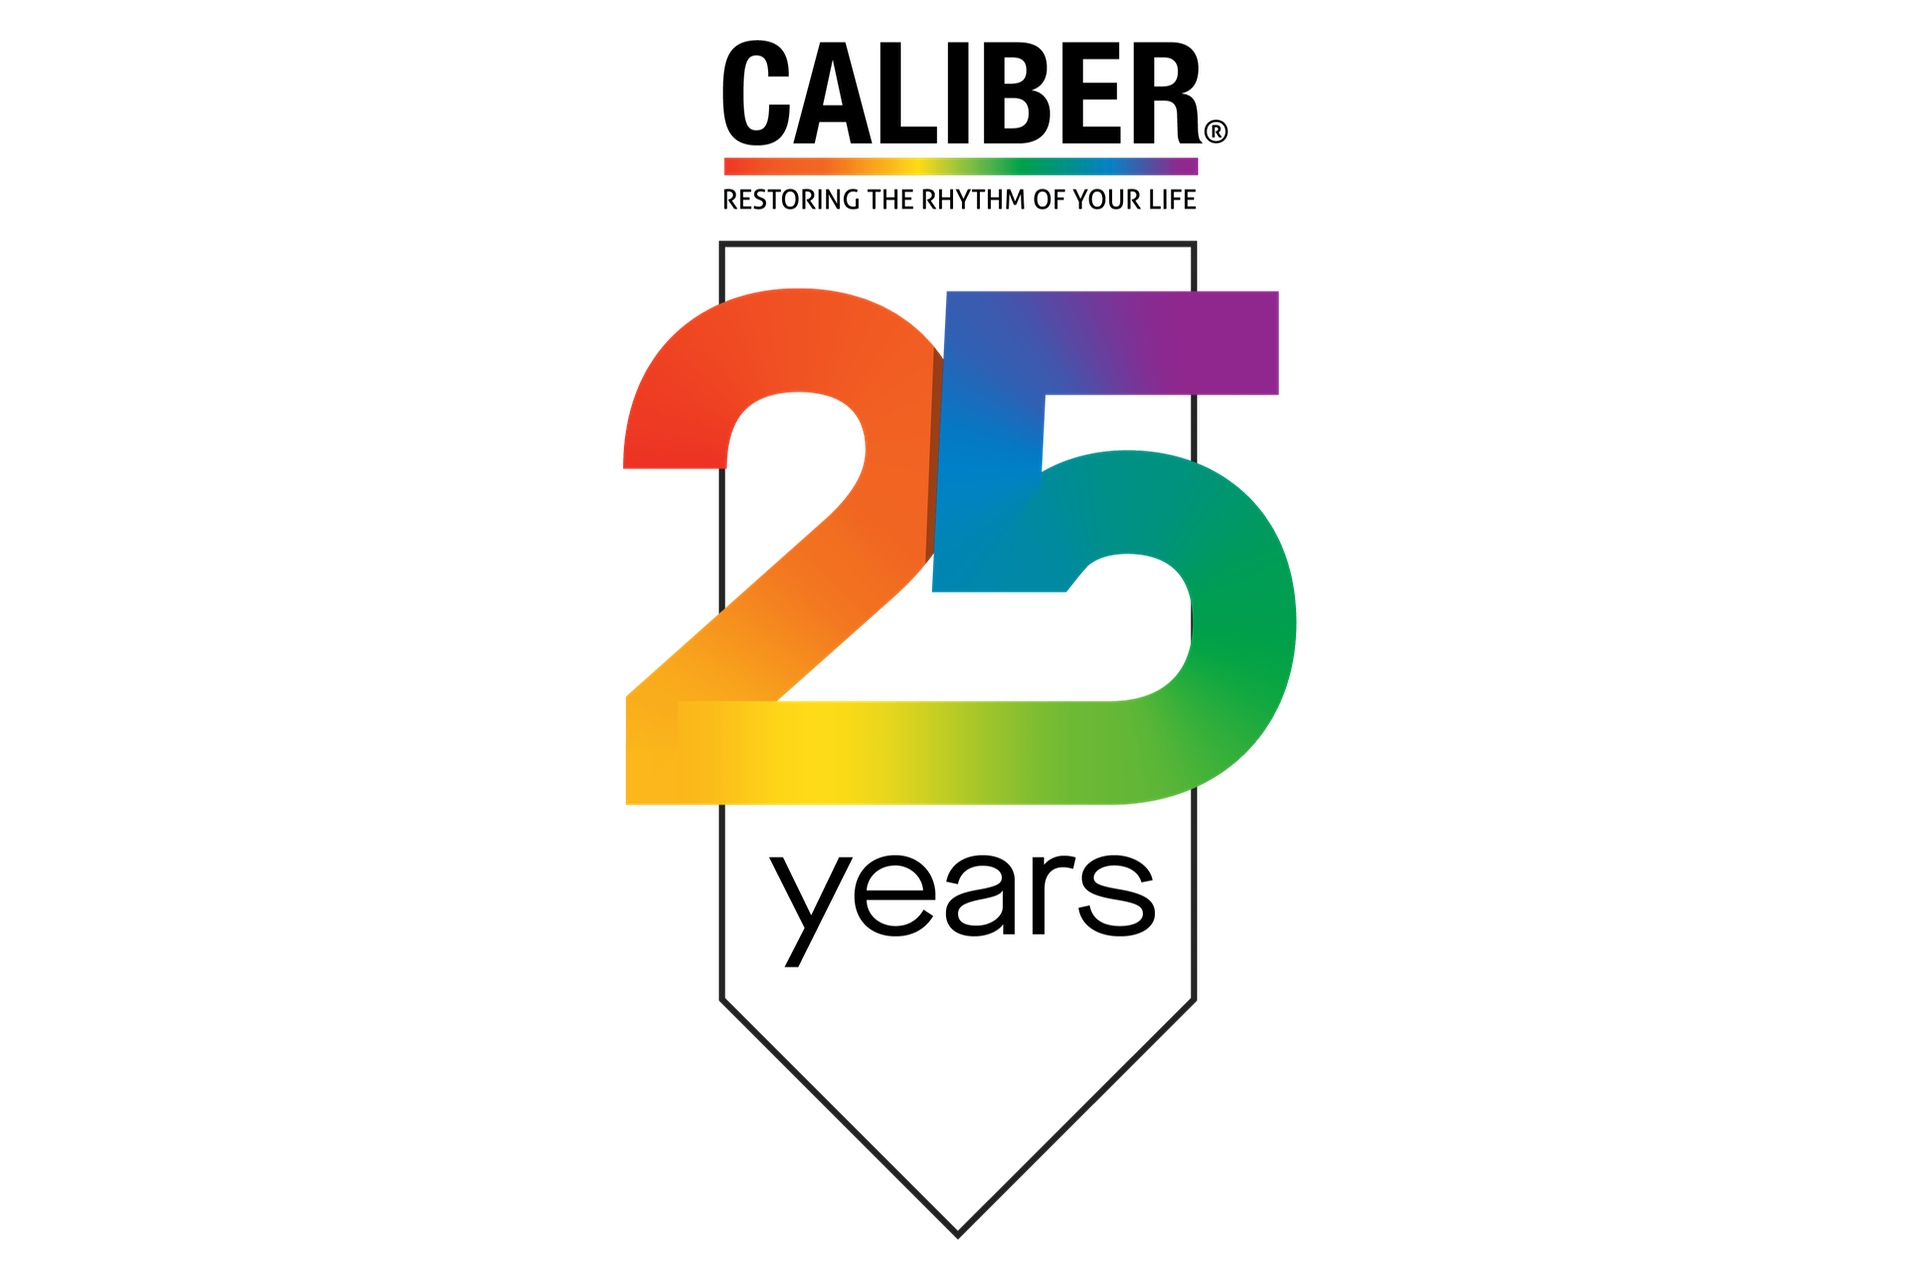 US MSO Caliber Celebrates 25 Years In The Body Repair Industry